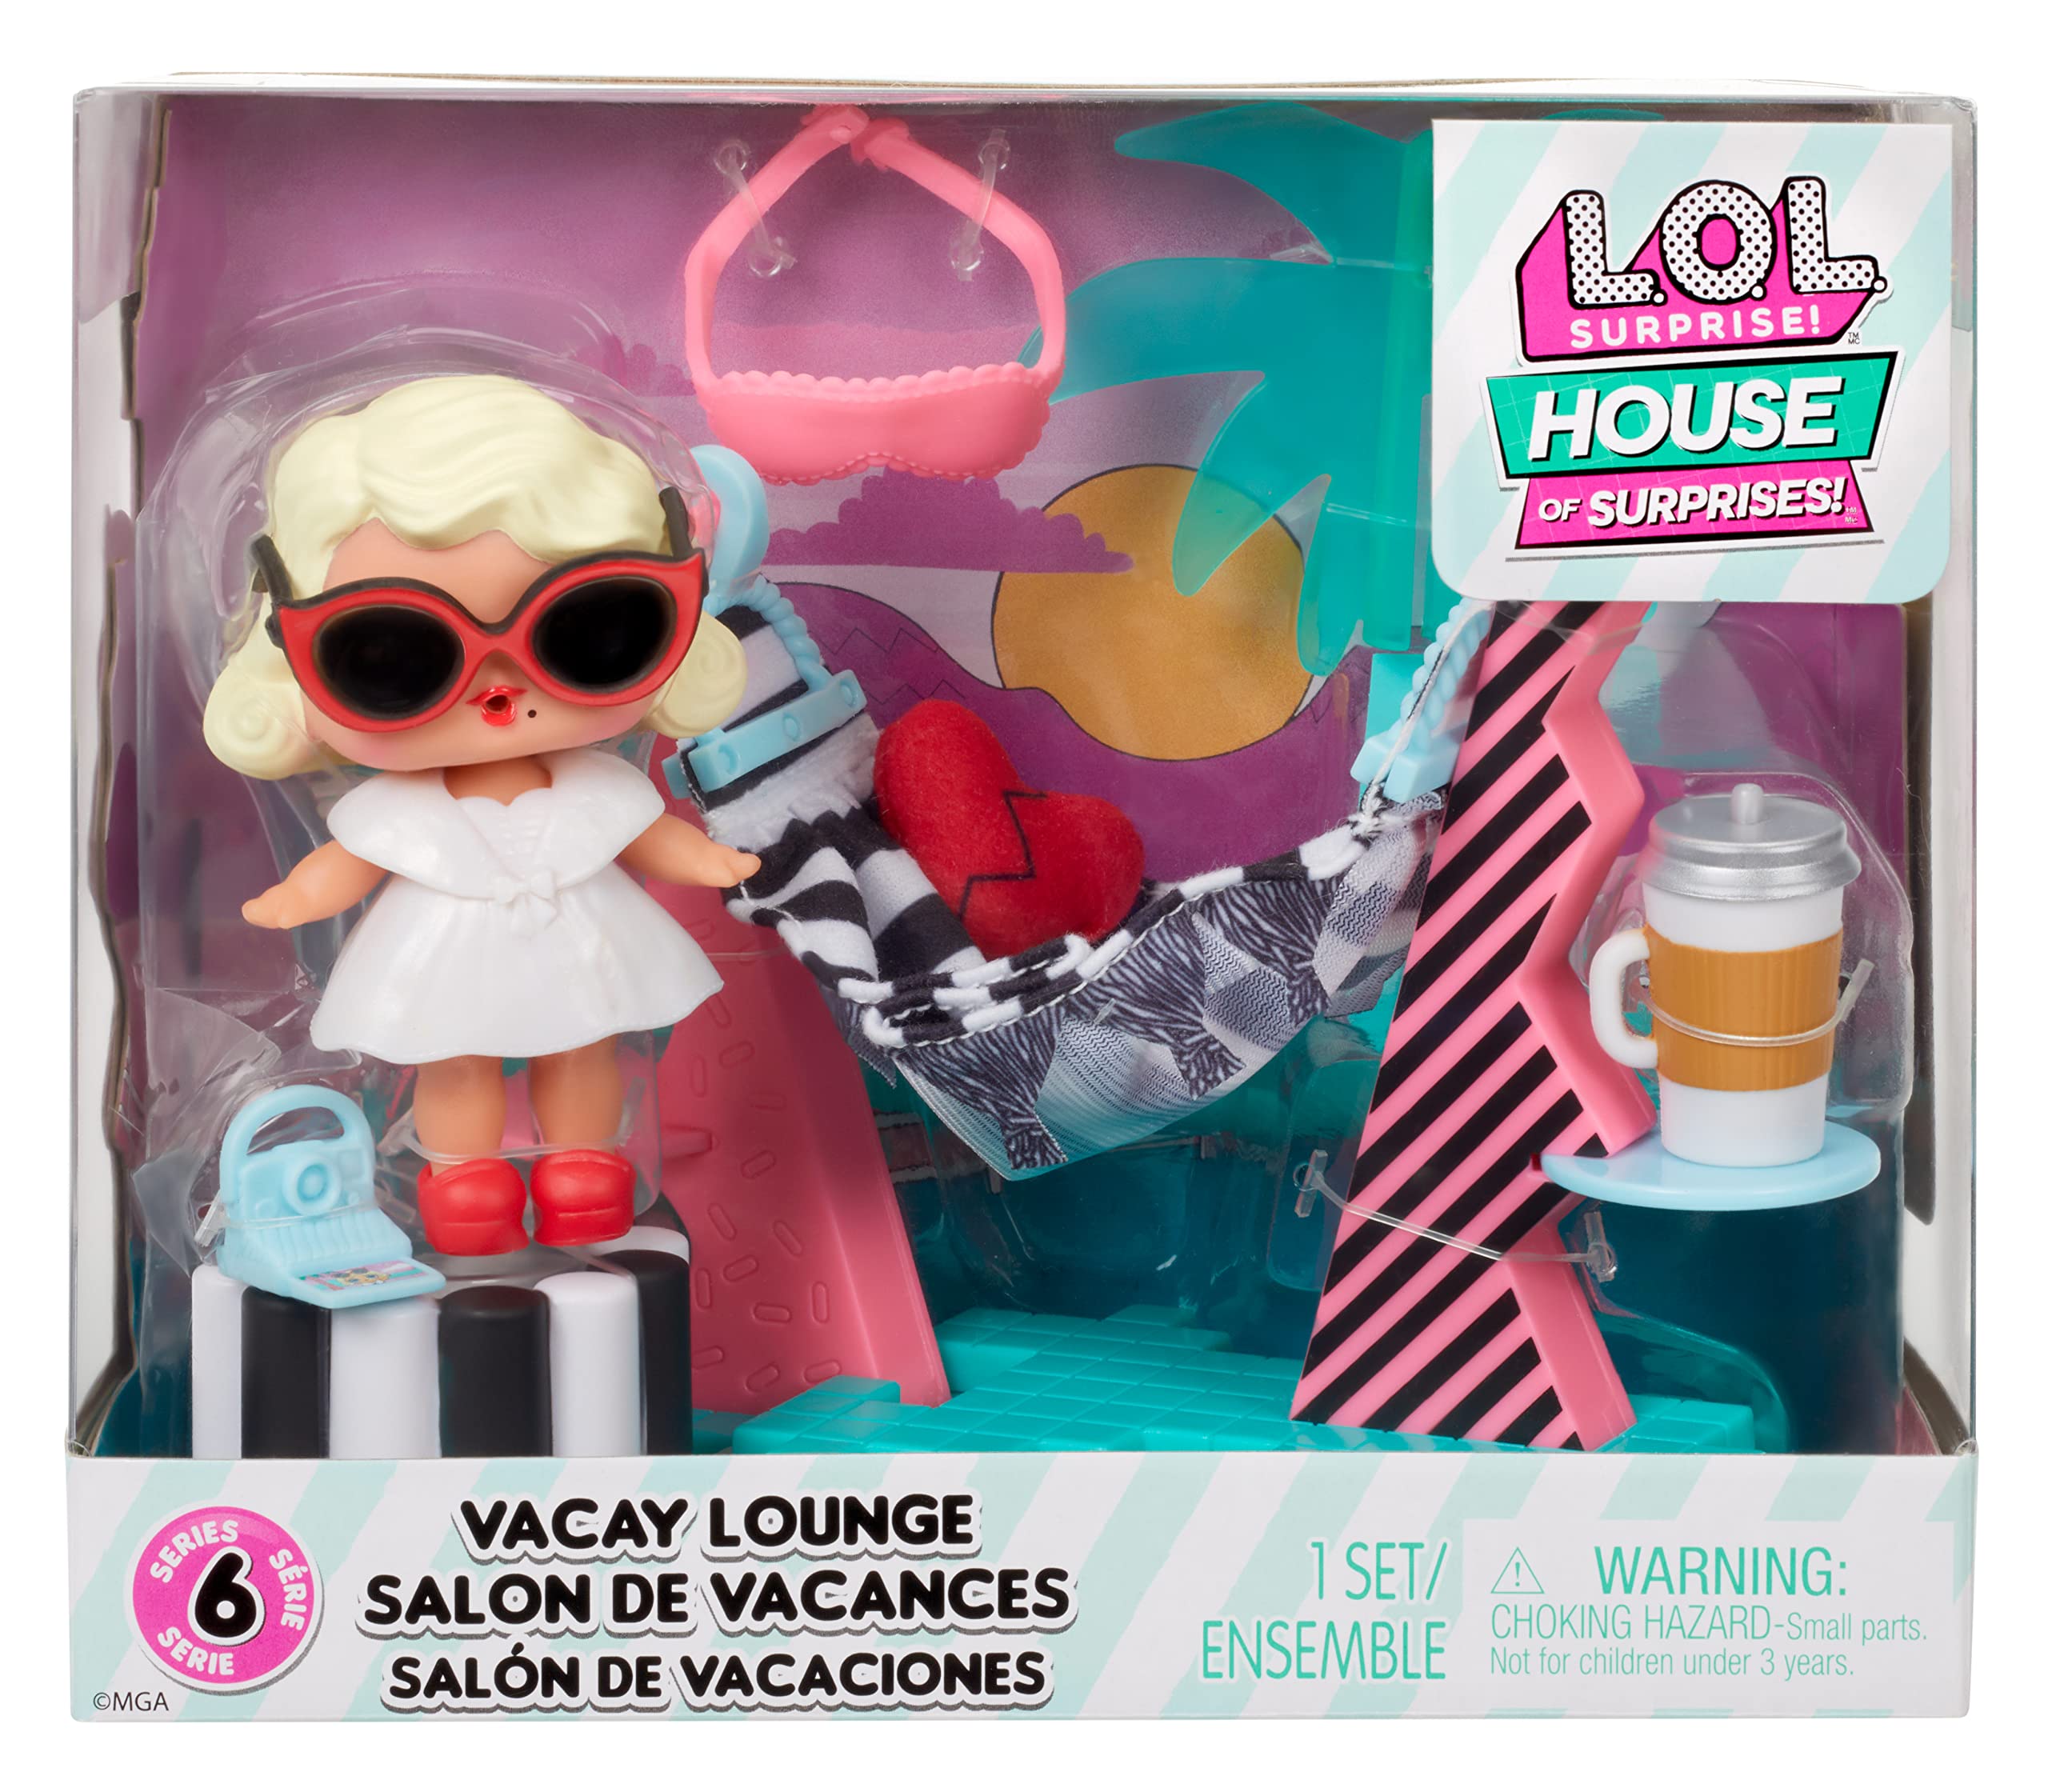 LOL Surprise OMG House of Surprises Vacay Lounge Playset with Leading Baby Collectible Doll with 8 Surprises, Dollhouse Accessories, Holiday Toy, Great Gift for Kids Ages 4 5 6+ Years Old & Collectors